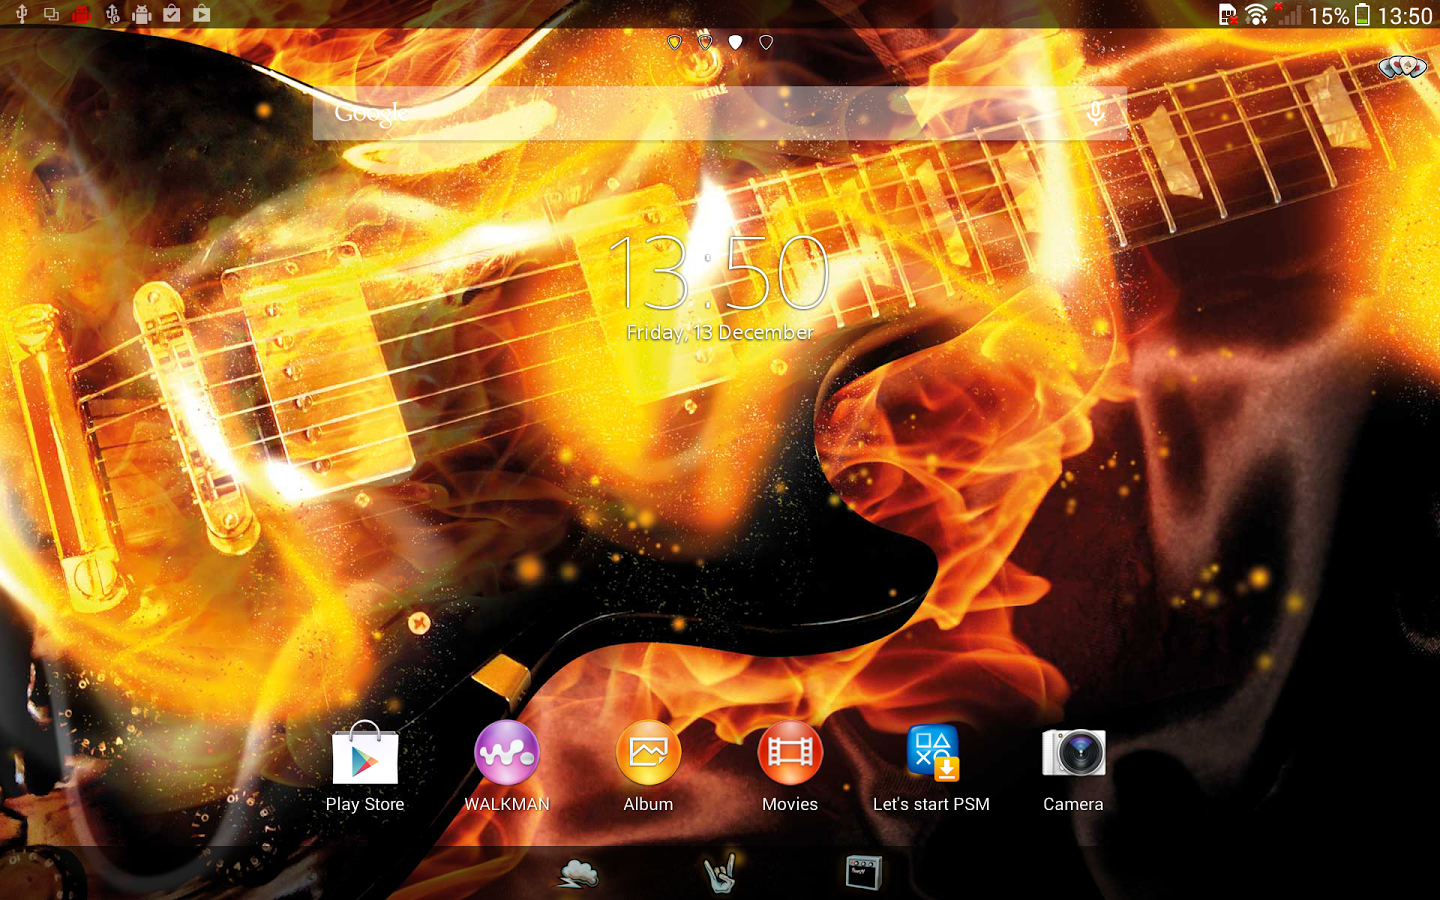 Xperia Themes on Tablet Z - Rock On